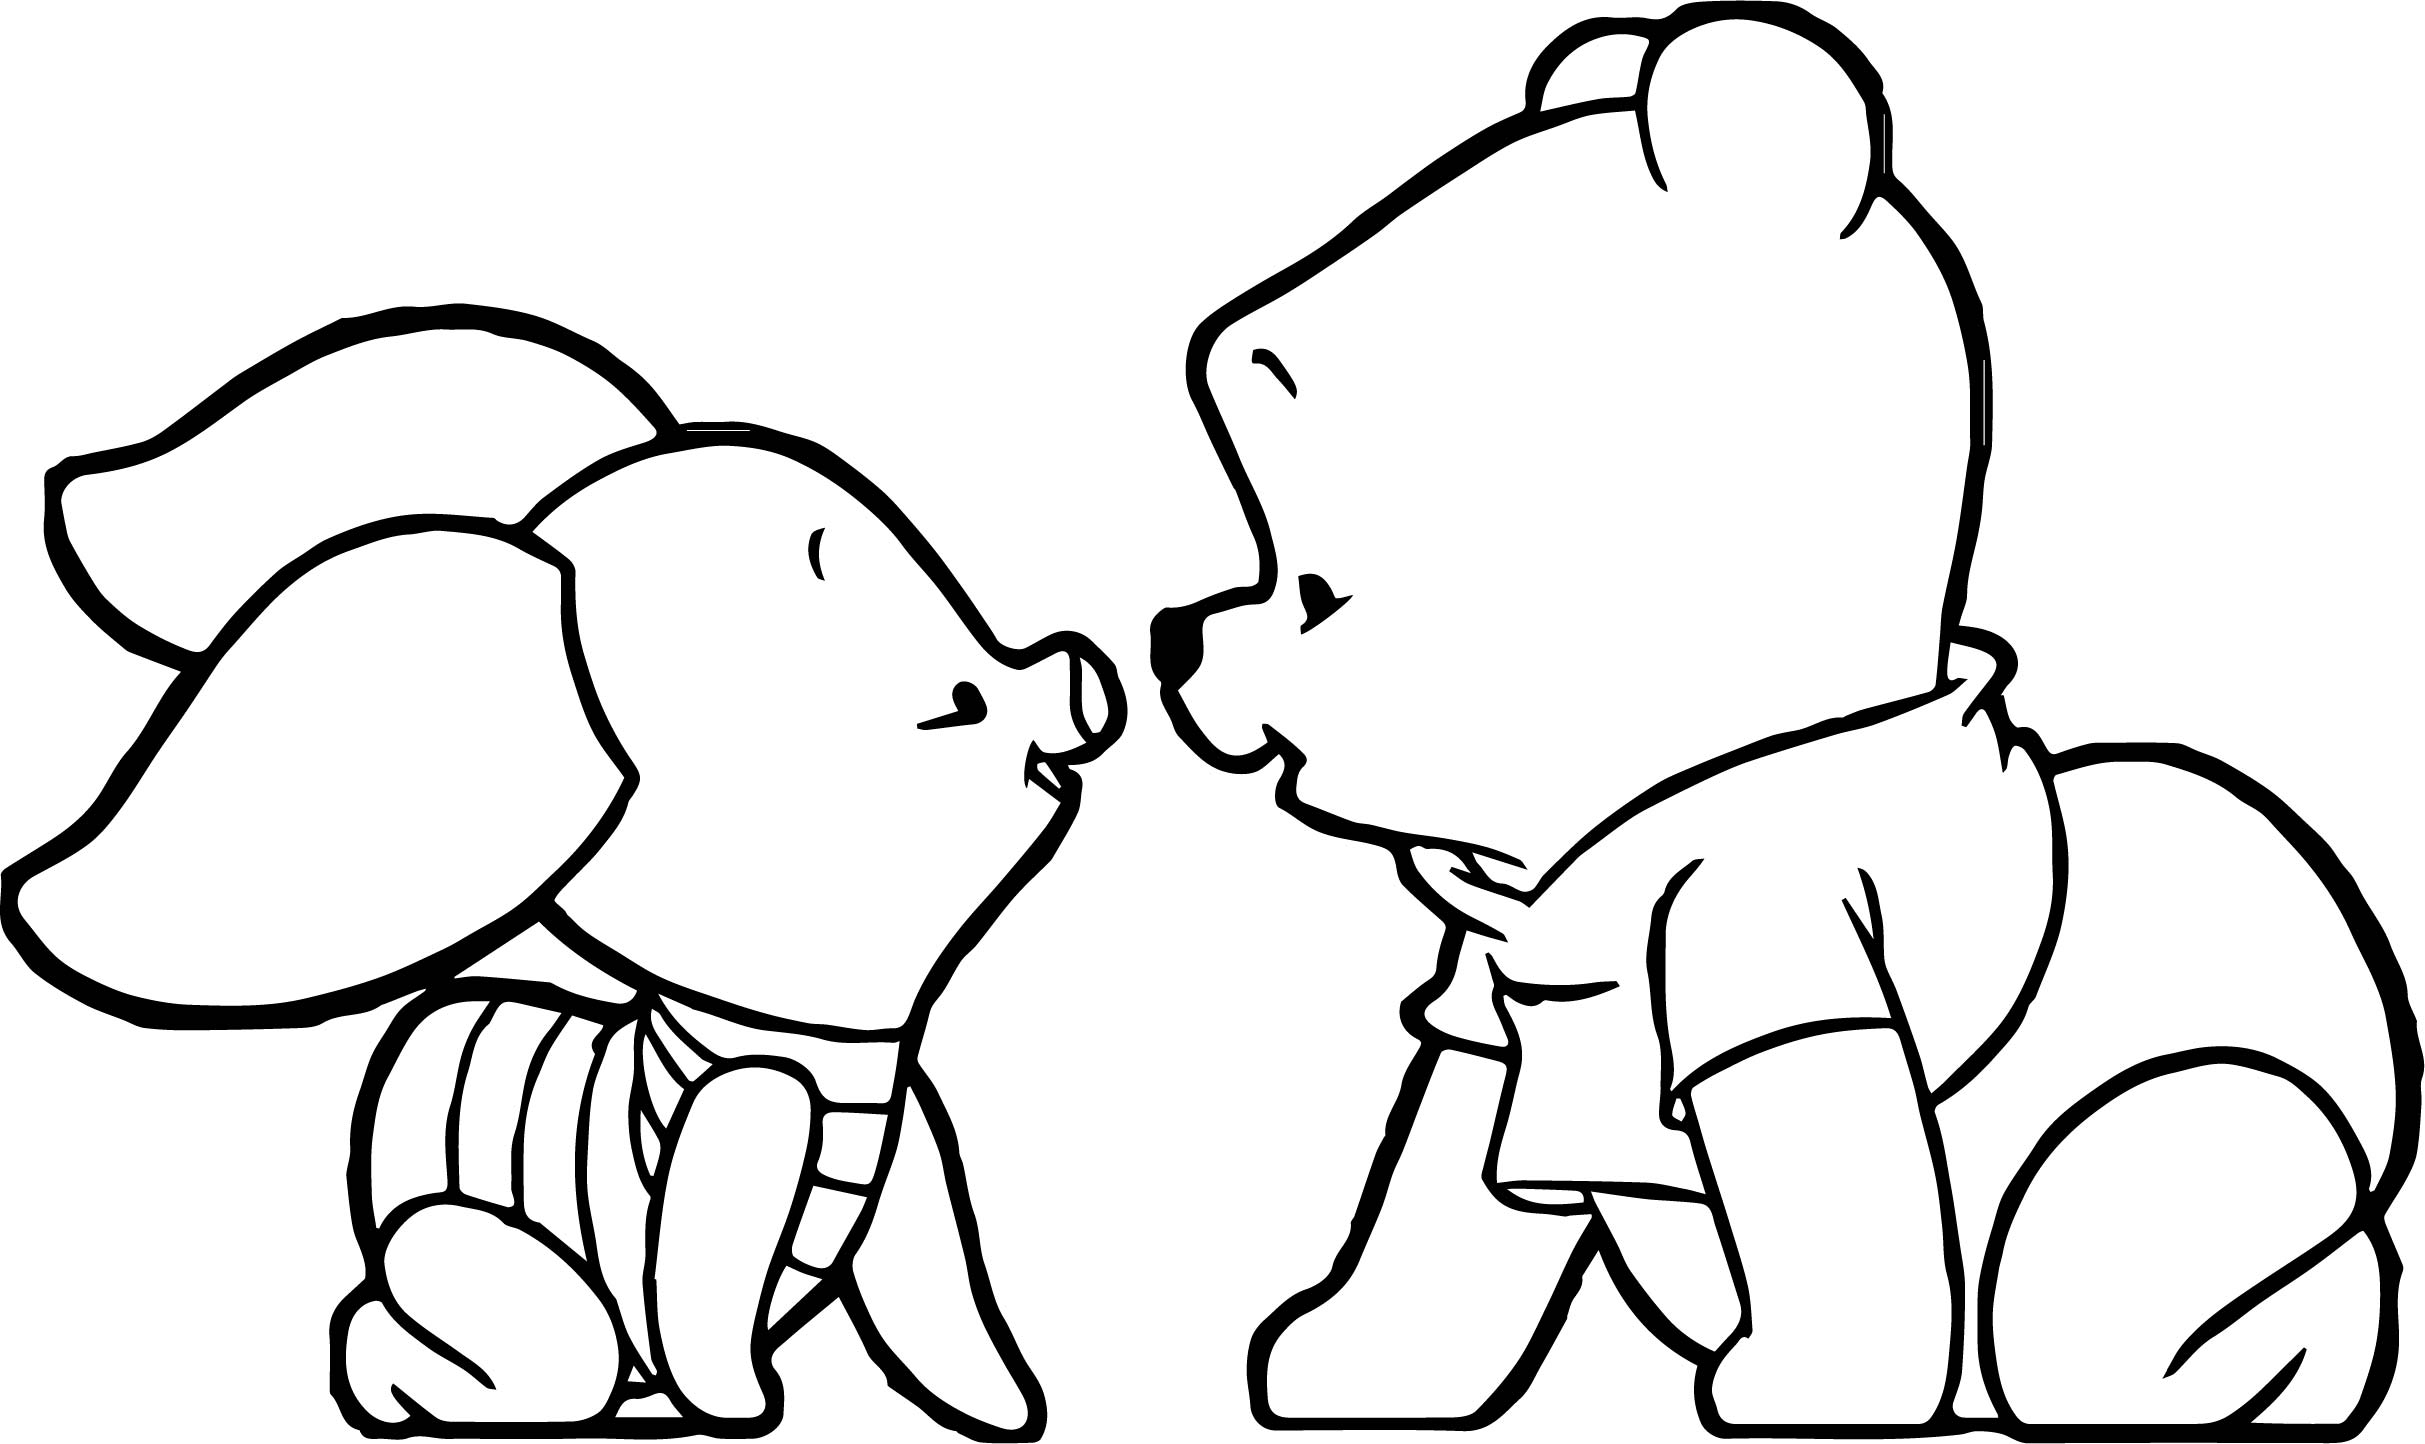 Baby Pooh Coloring Pages at GetColorings.com | Free printable colorings